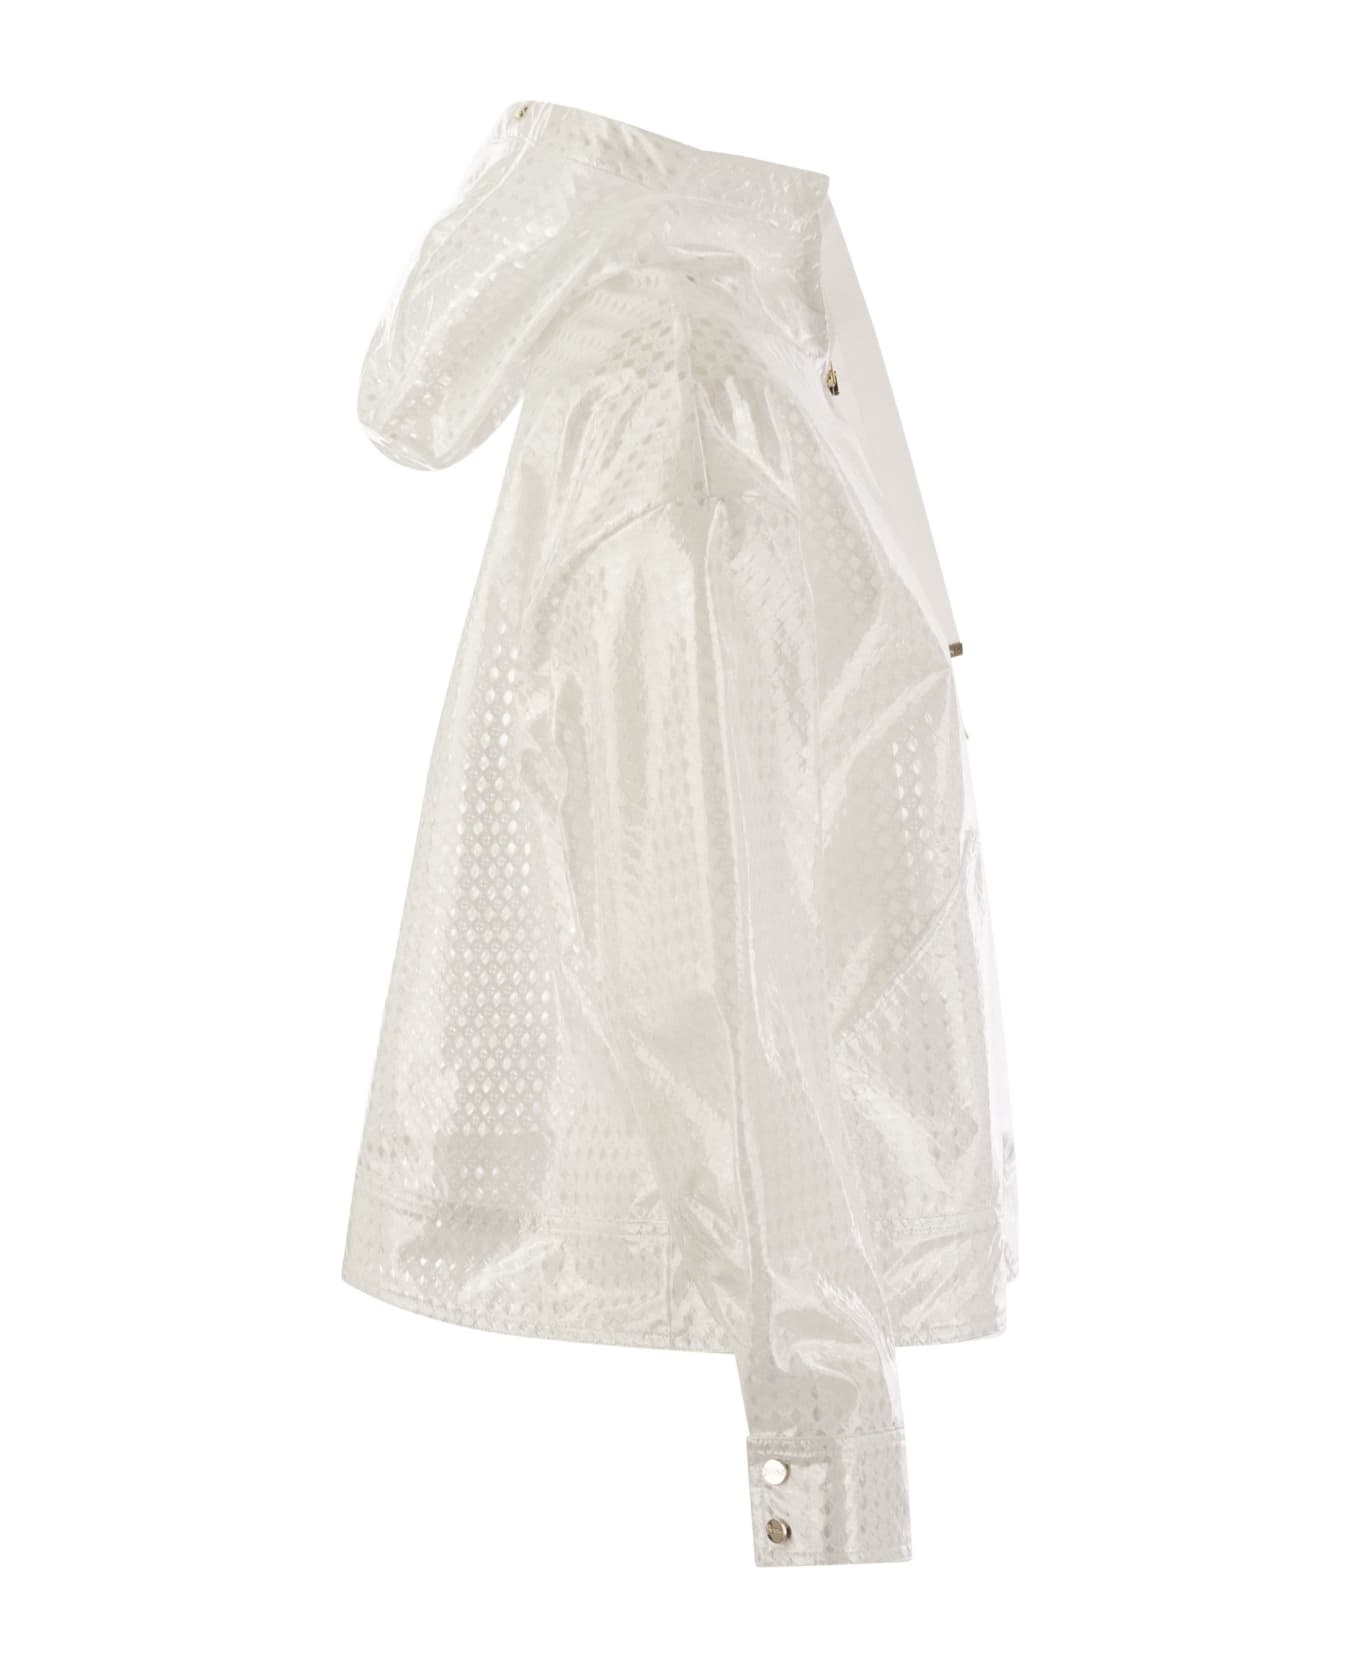 Herno A-shape In Coated Lace And Grosgrain - White